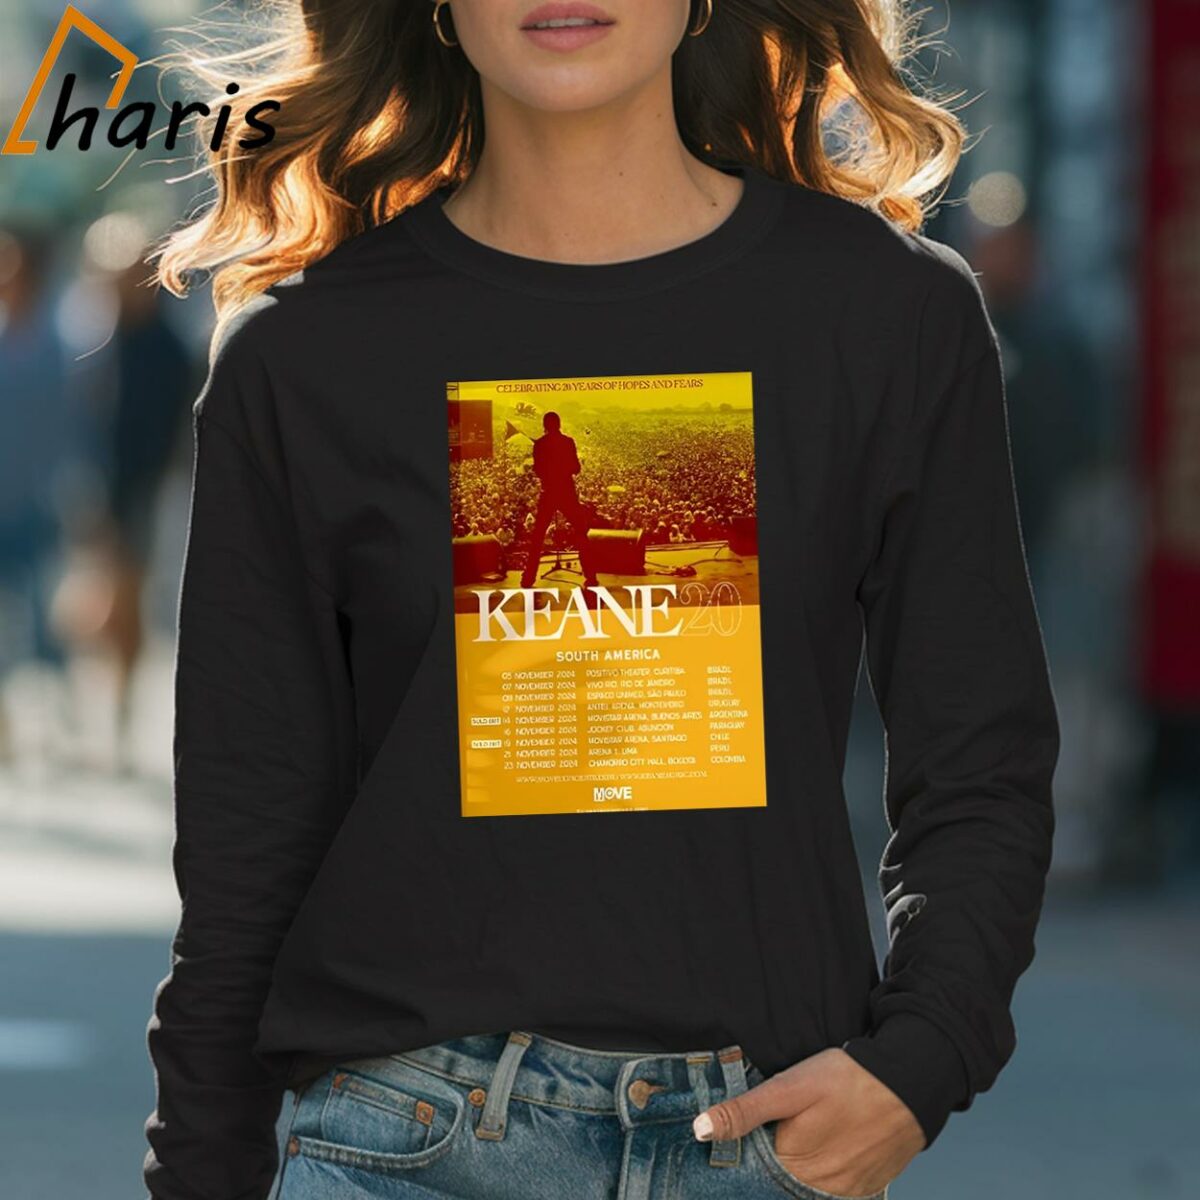 Keane 20 Years Of Hopes And Fears Tour Date South America T shirt 4 Long sleeve shirt